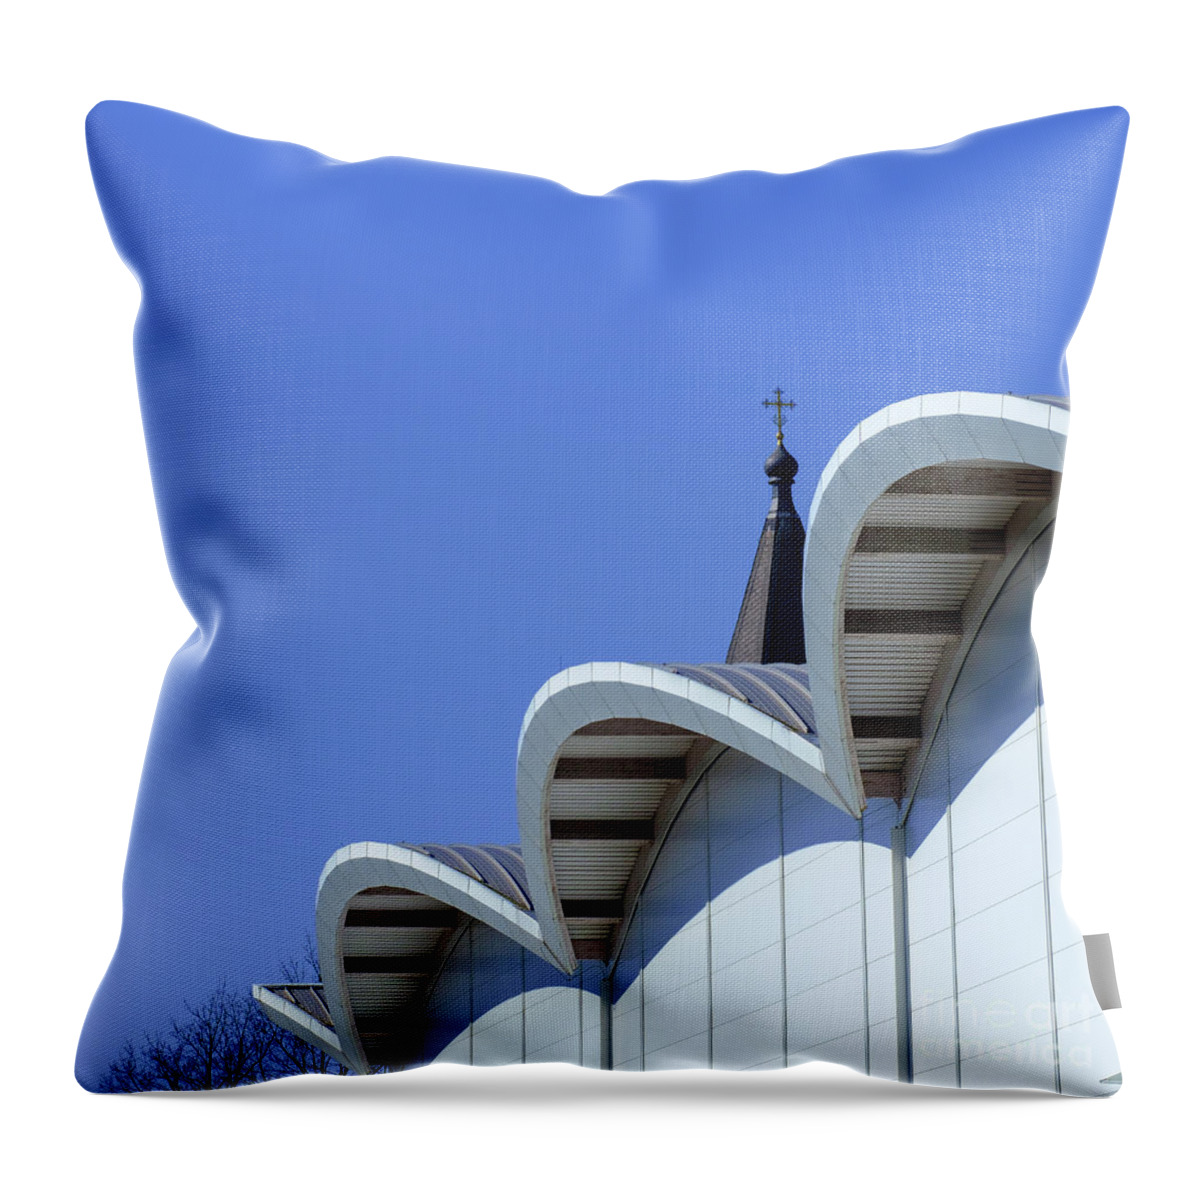 Old And Modern In City By Marina Usmanskaya Throw Pillow featuring the photograph Old and modern in city by Marina Usmanskaya